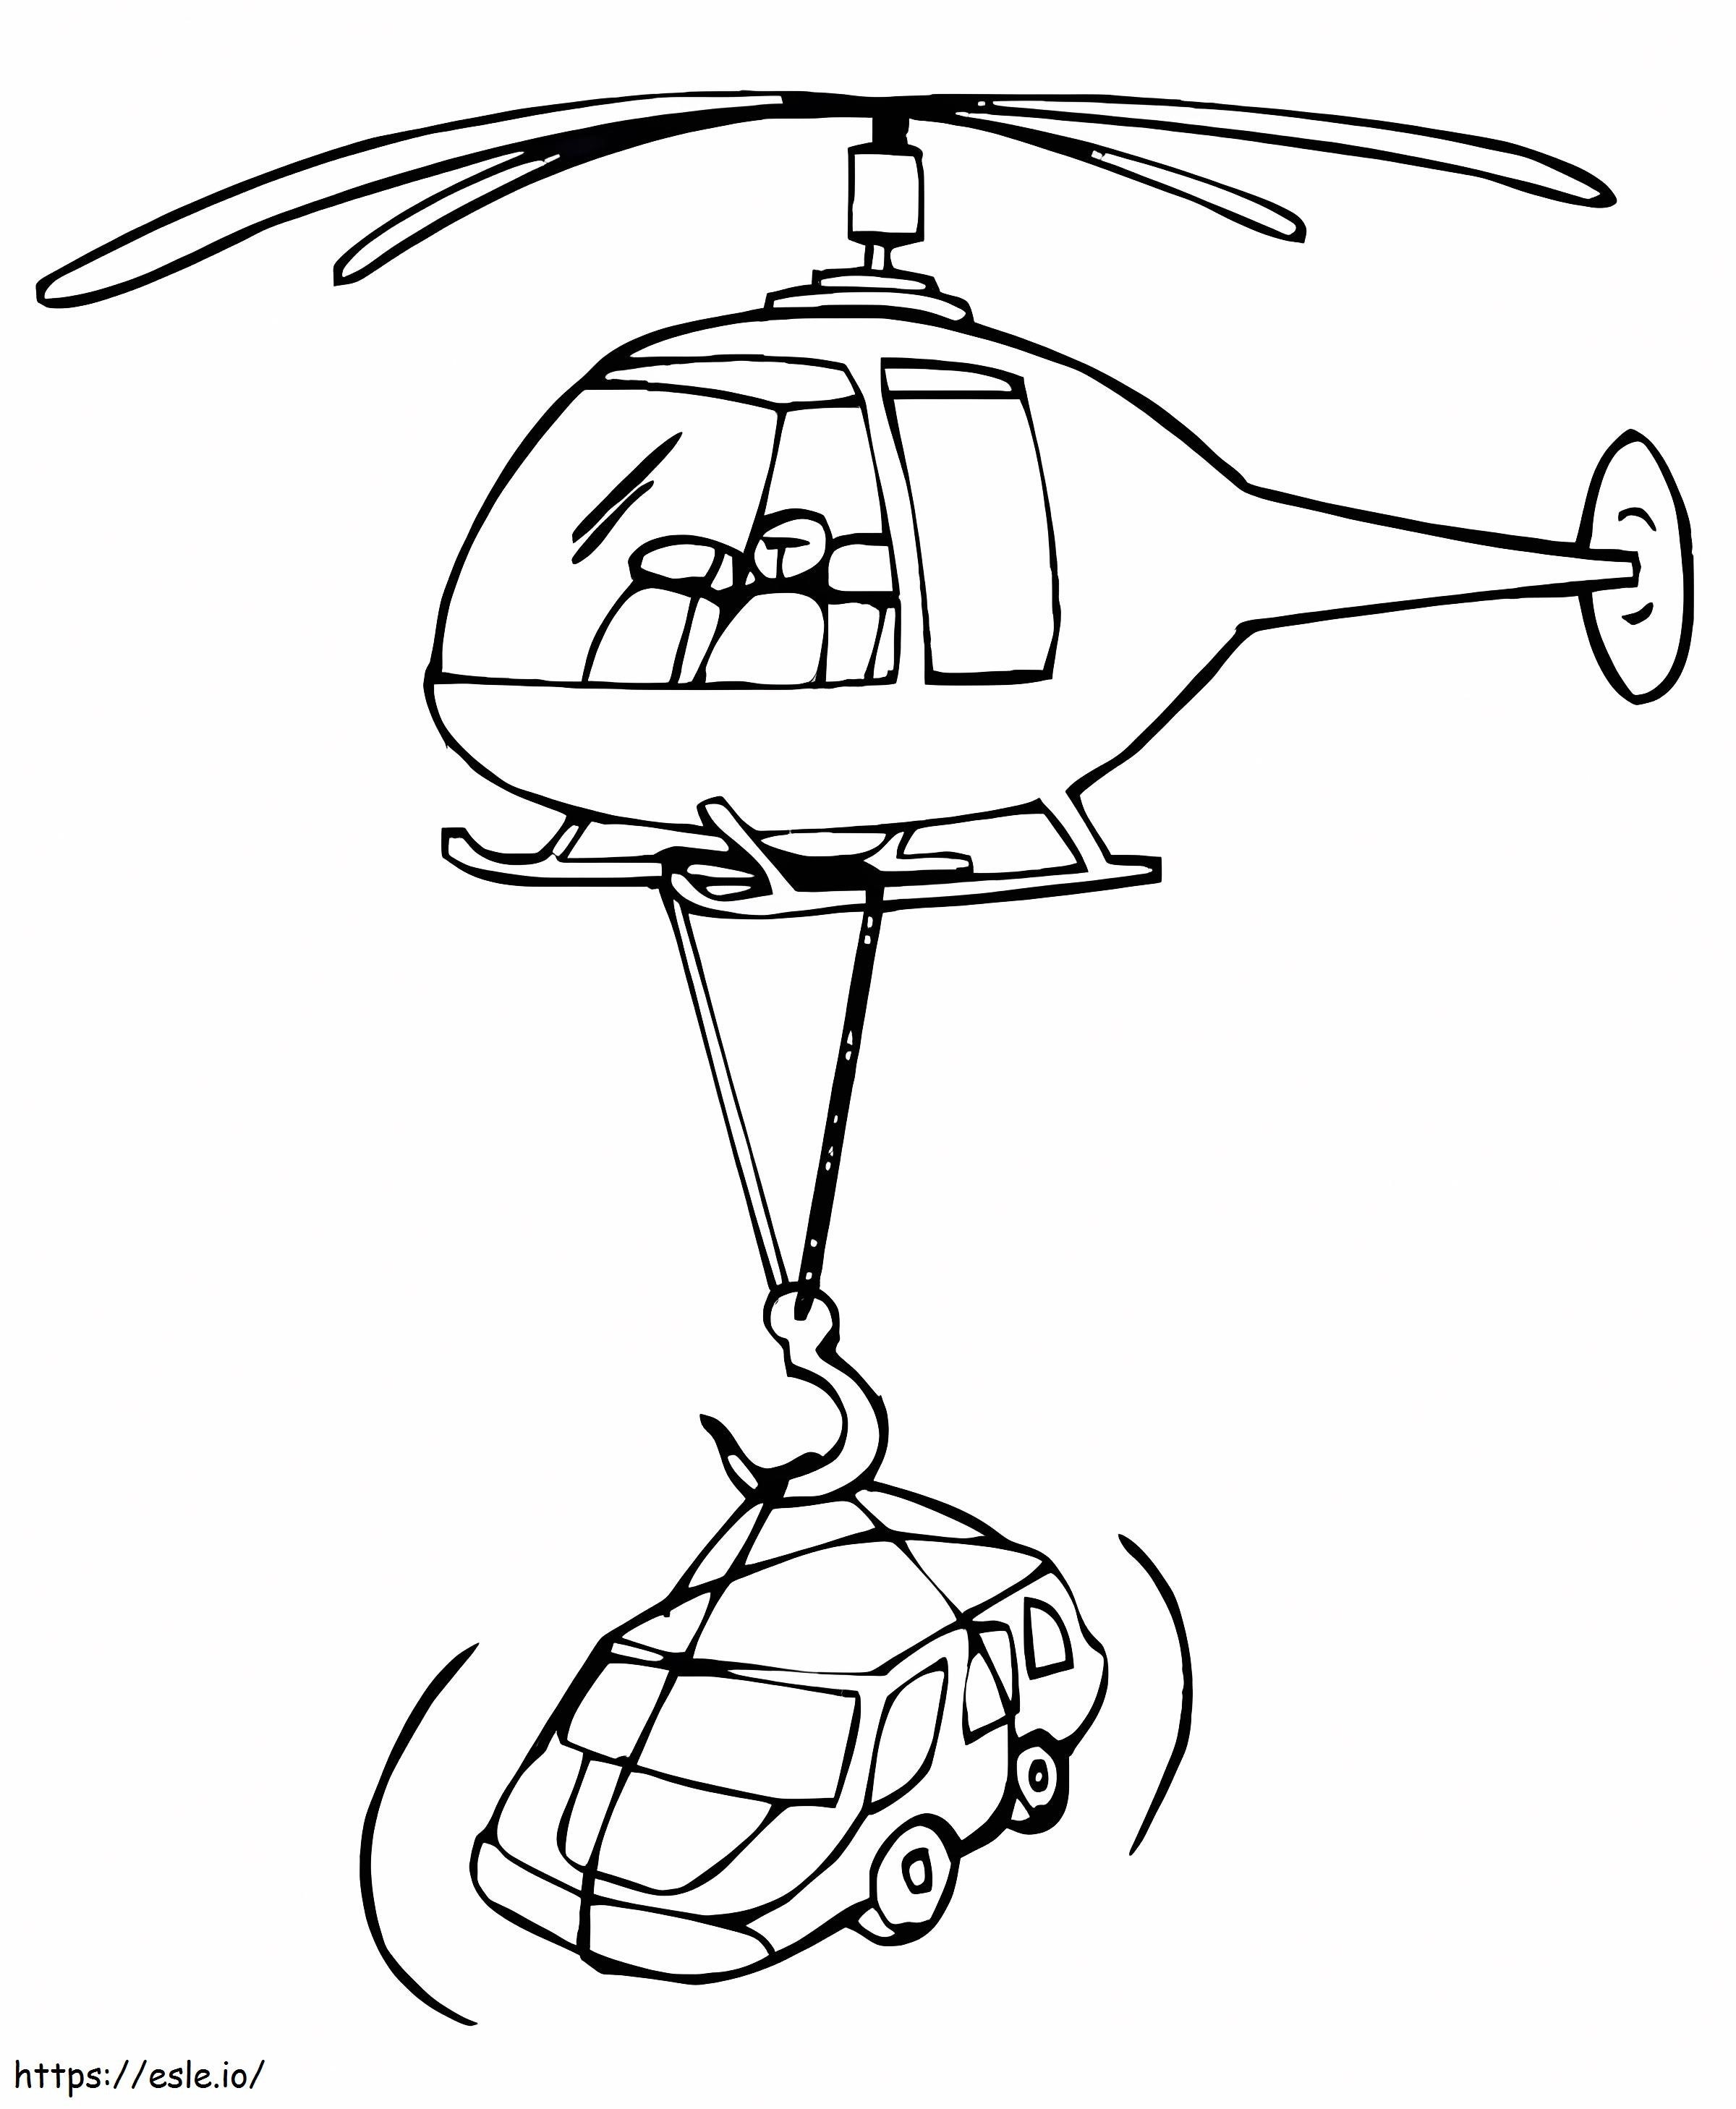 Helicopter With Car coloring page